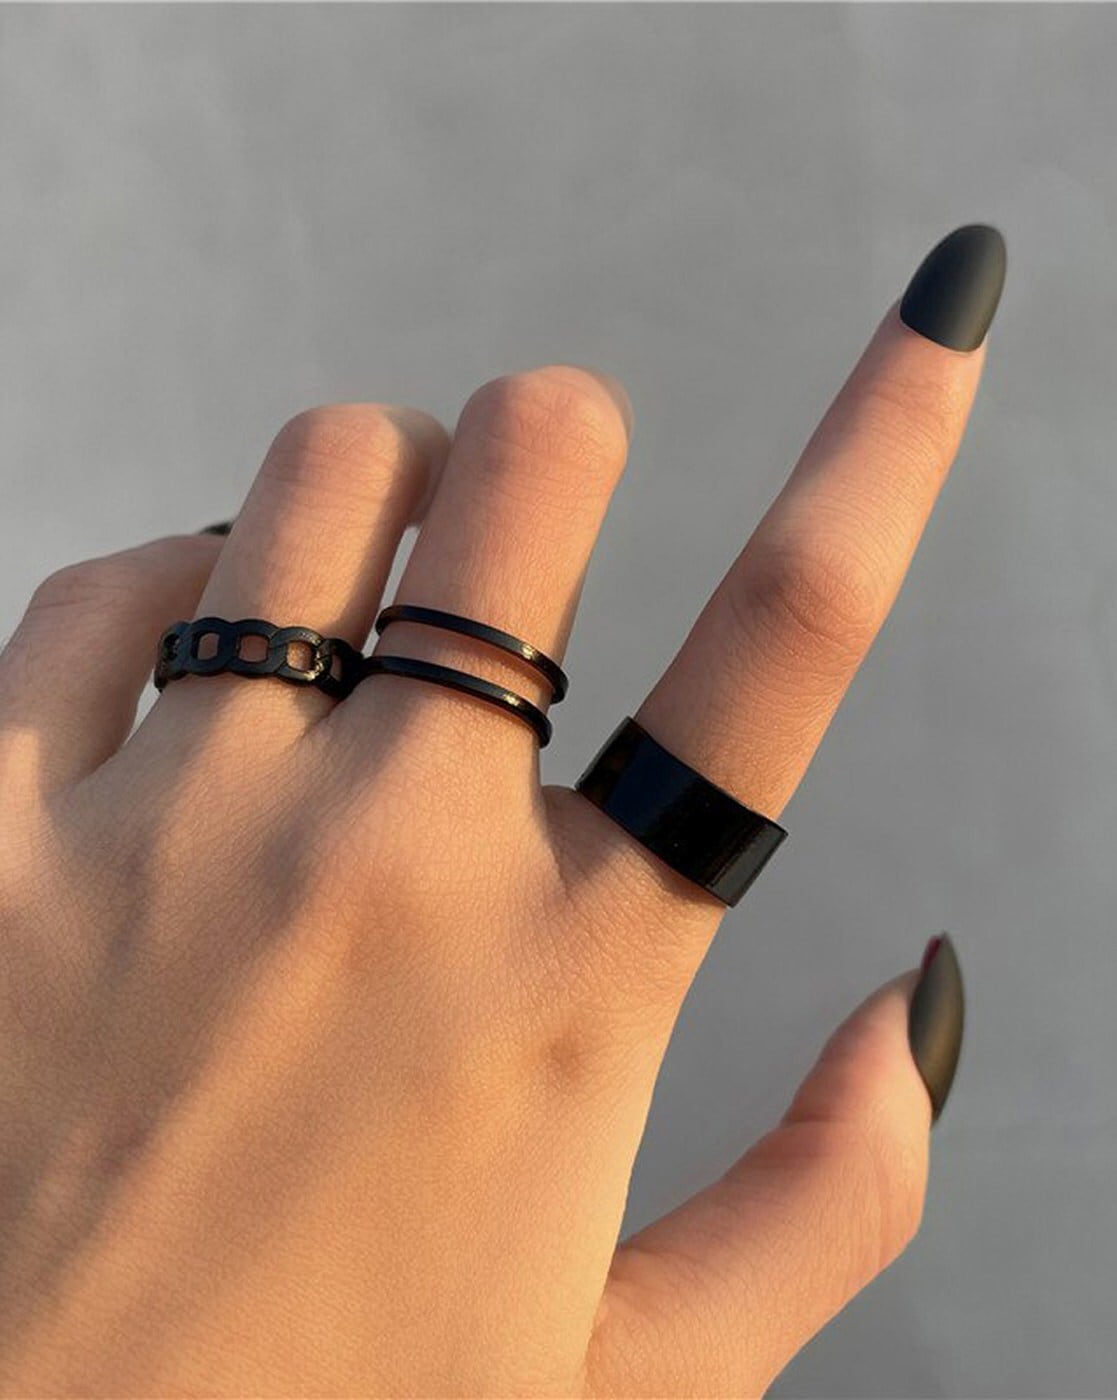 Crescent Moon Ring, Black Tourmaline Ring, Sterling Silver Ring for Women,  Celestial Witch Jewelry, Teardrop Ring, Statement Boho Jewelry - Etsy